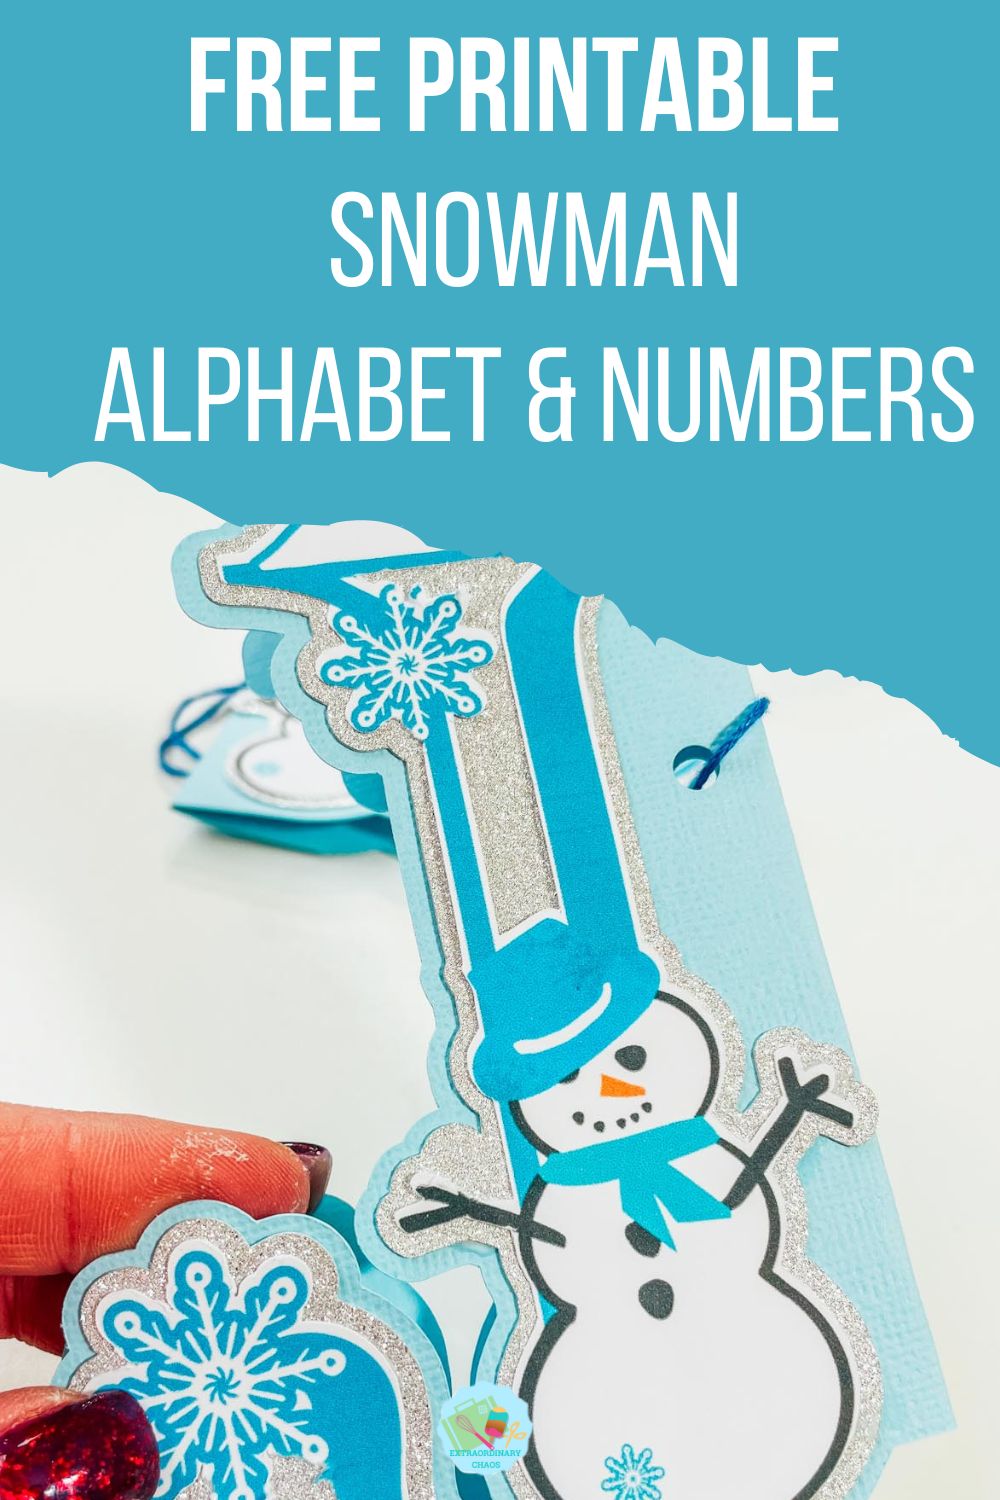 Free Printable Snowman Alphabet letter & Numbers for Cricut print and cut Christmas projects